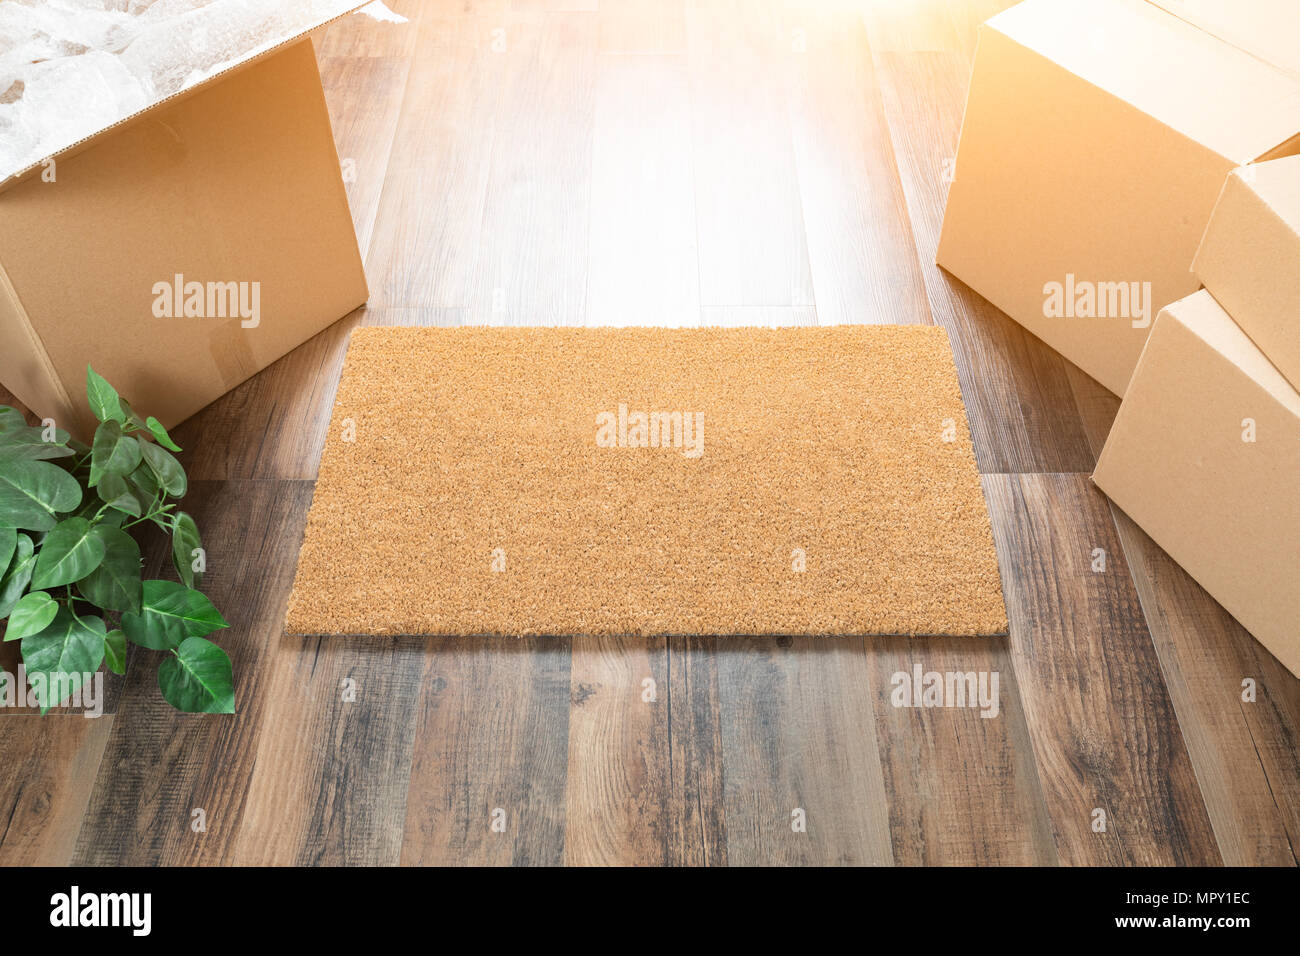 Blank Welcome Mat, Moving Boxes and Plant on Hard Wood Floors. Stock Photo